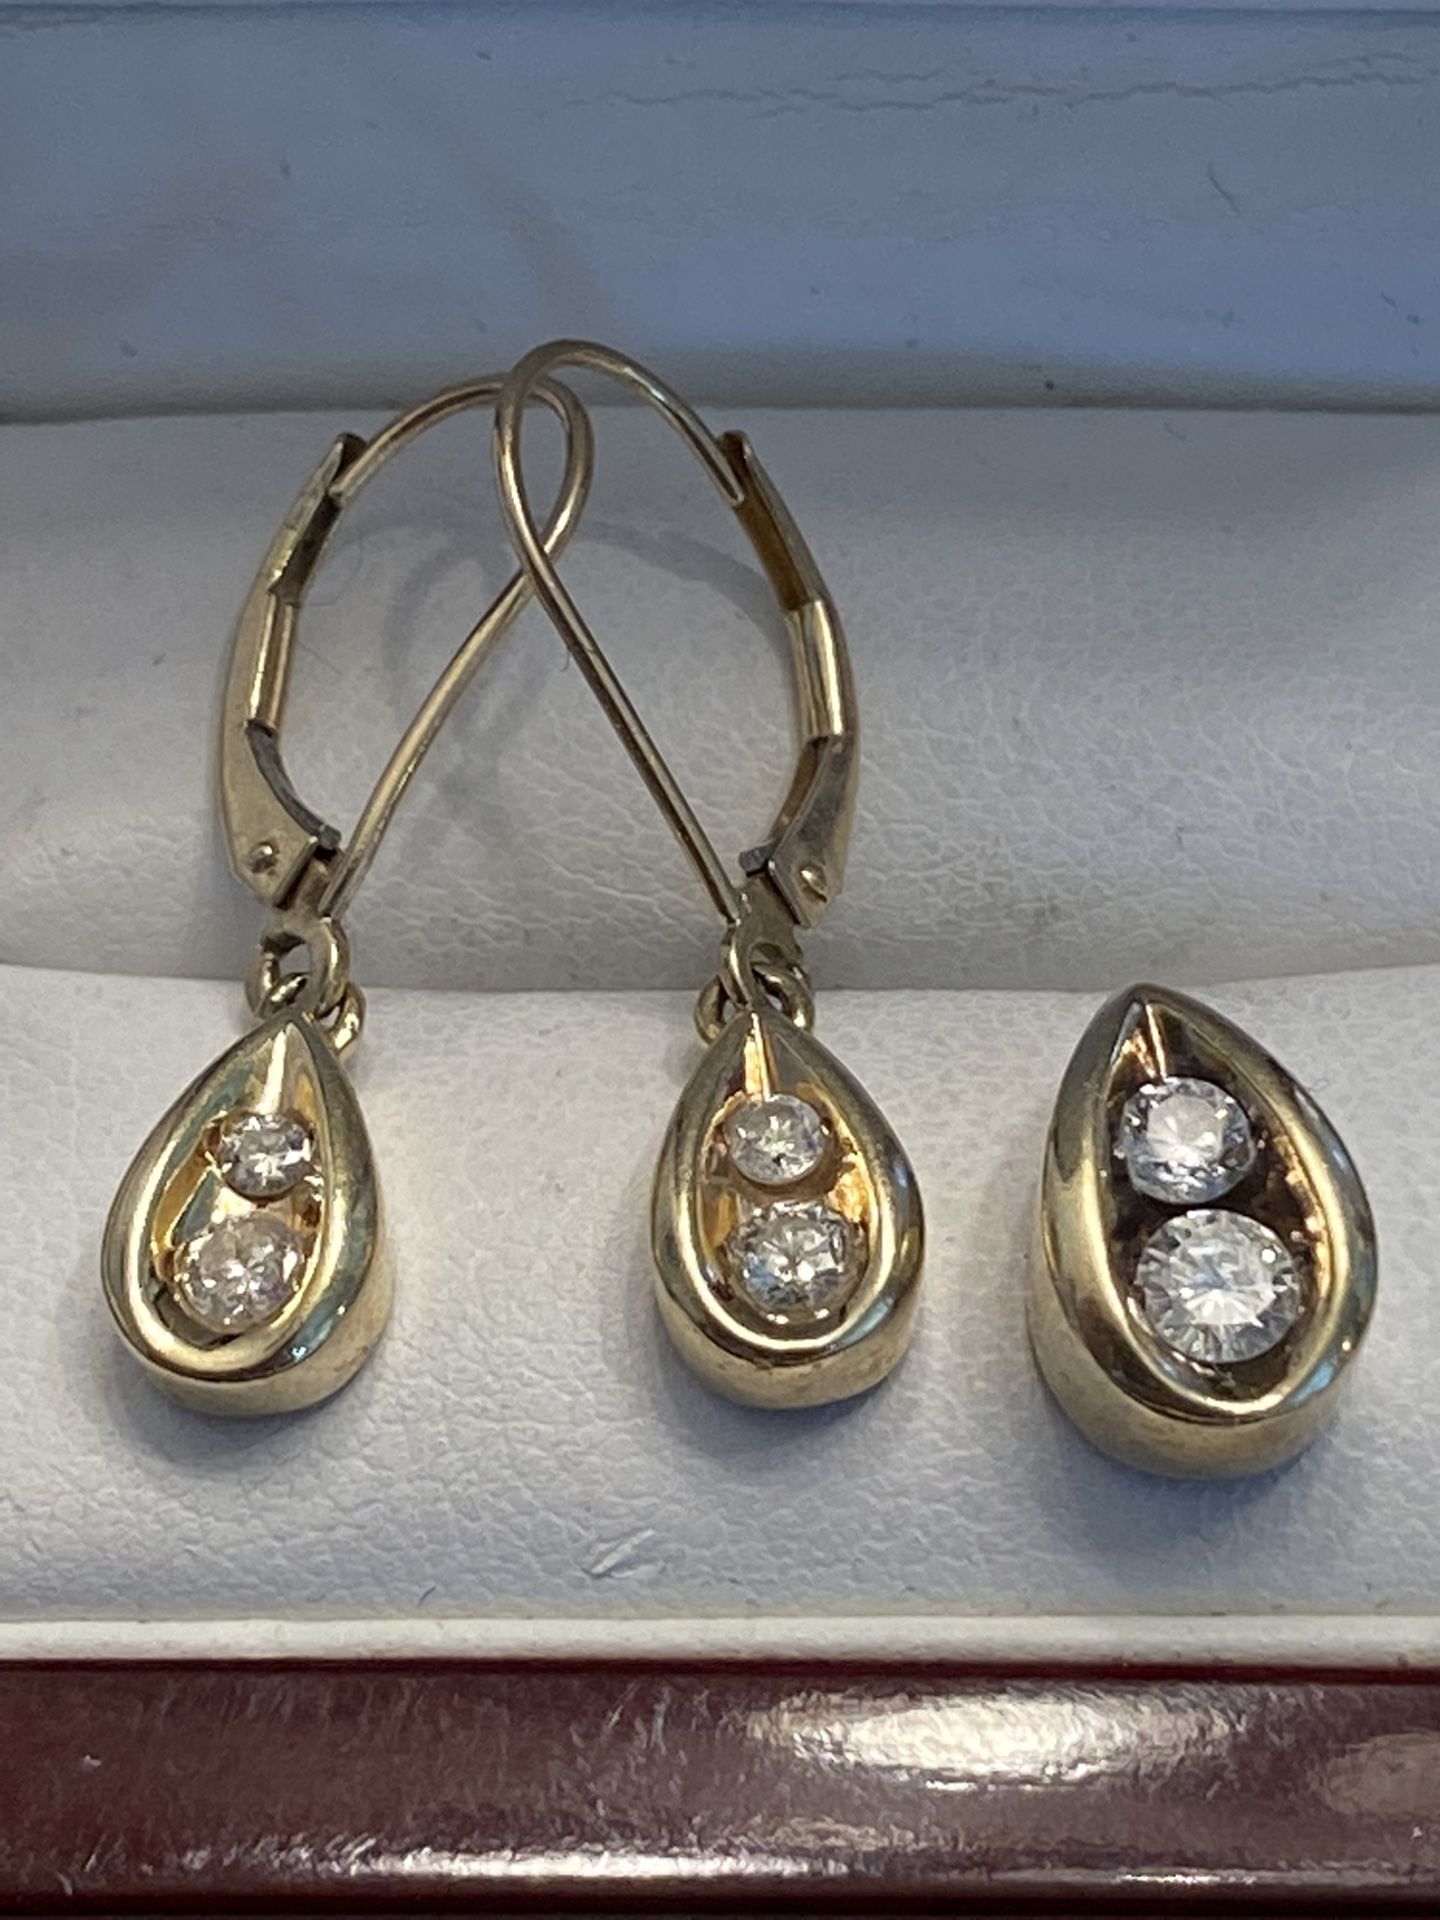 MATCHING 14 KT GOLD & DIAMOND EARRINGS AND PENDANT